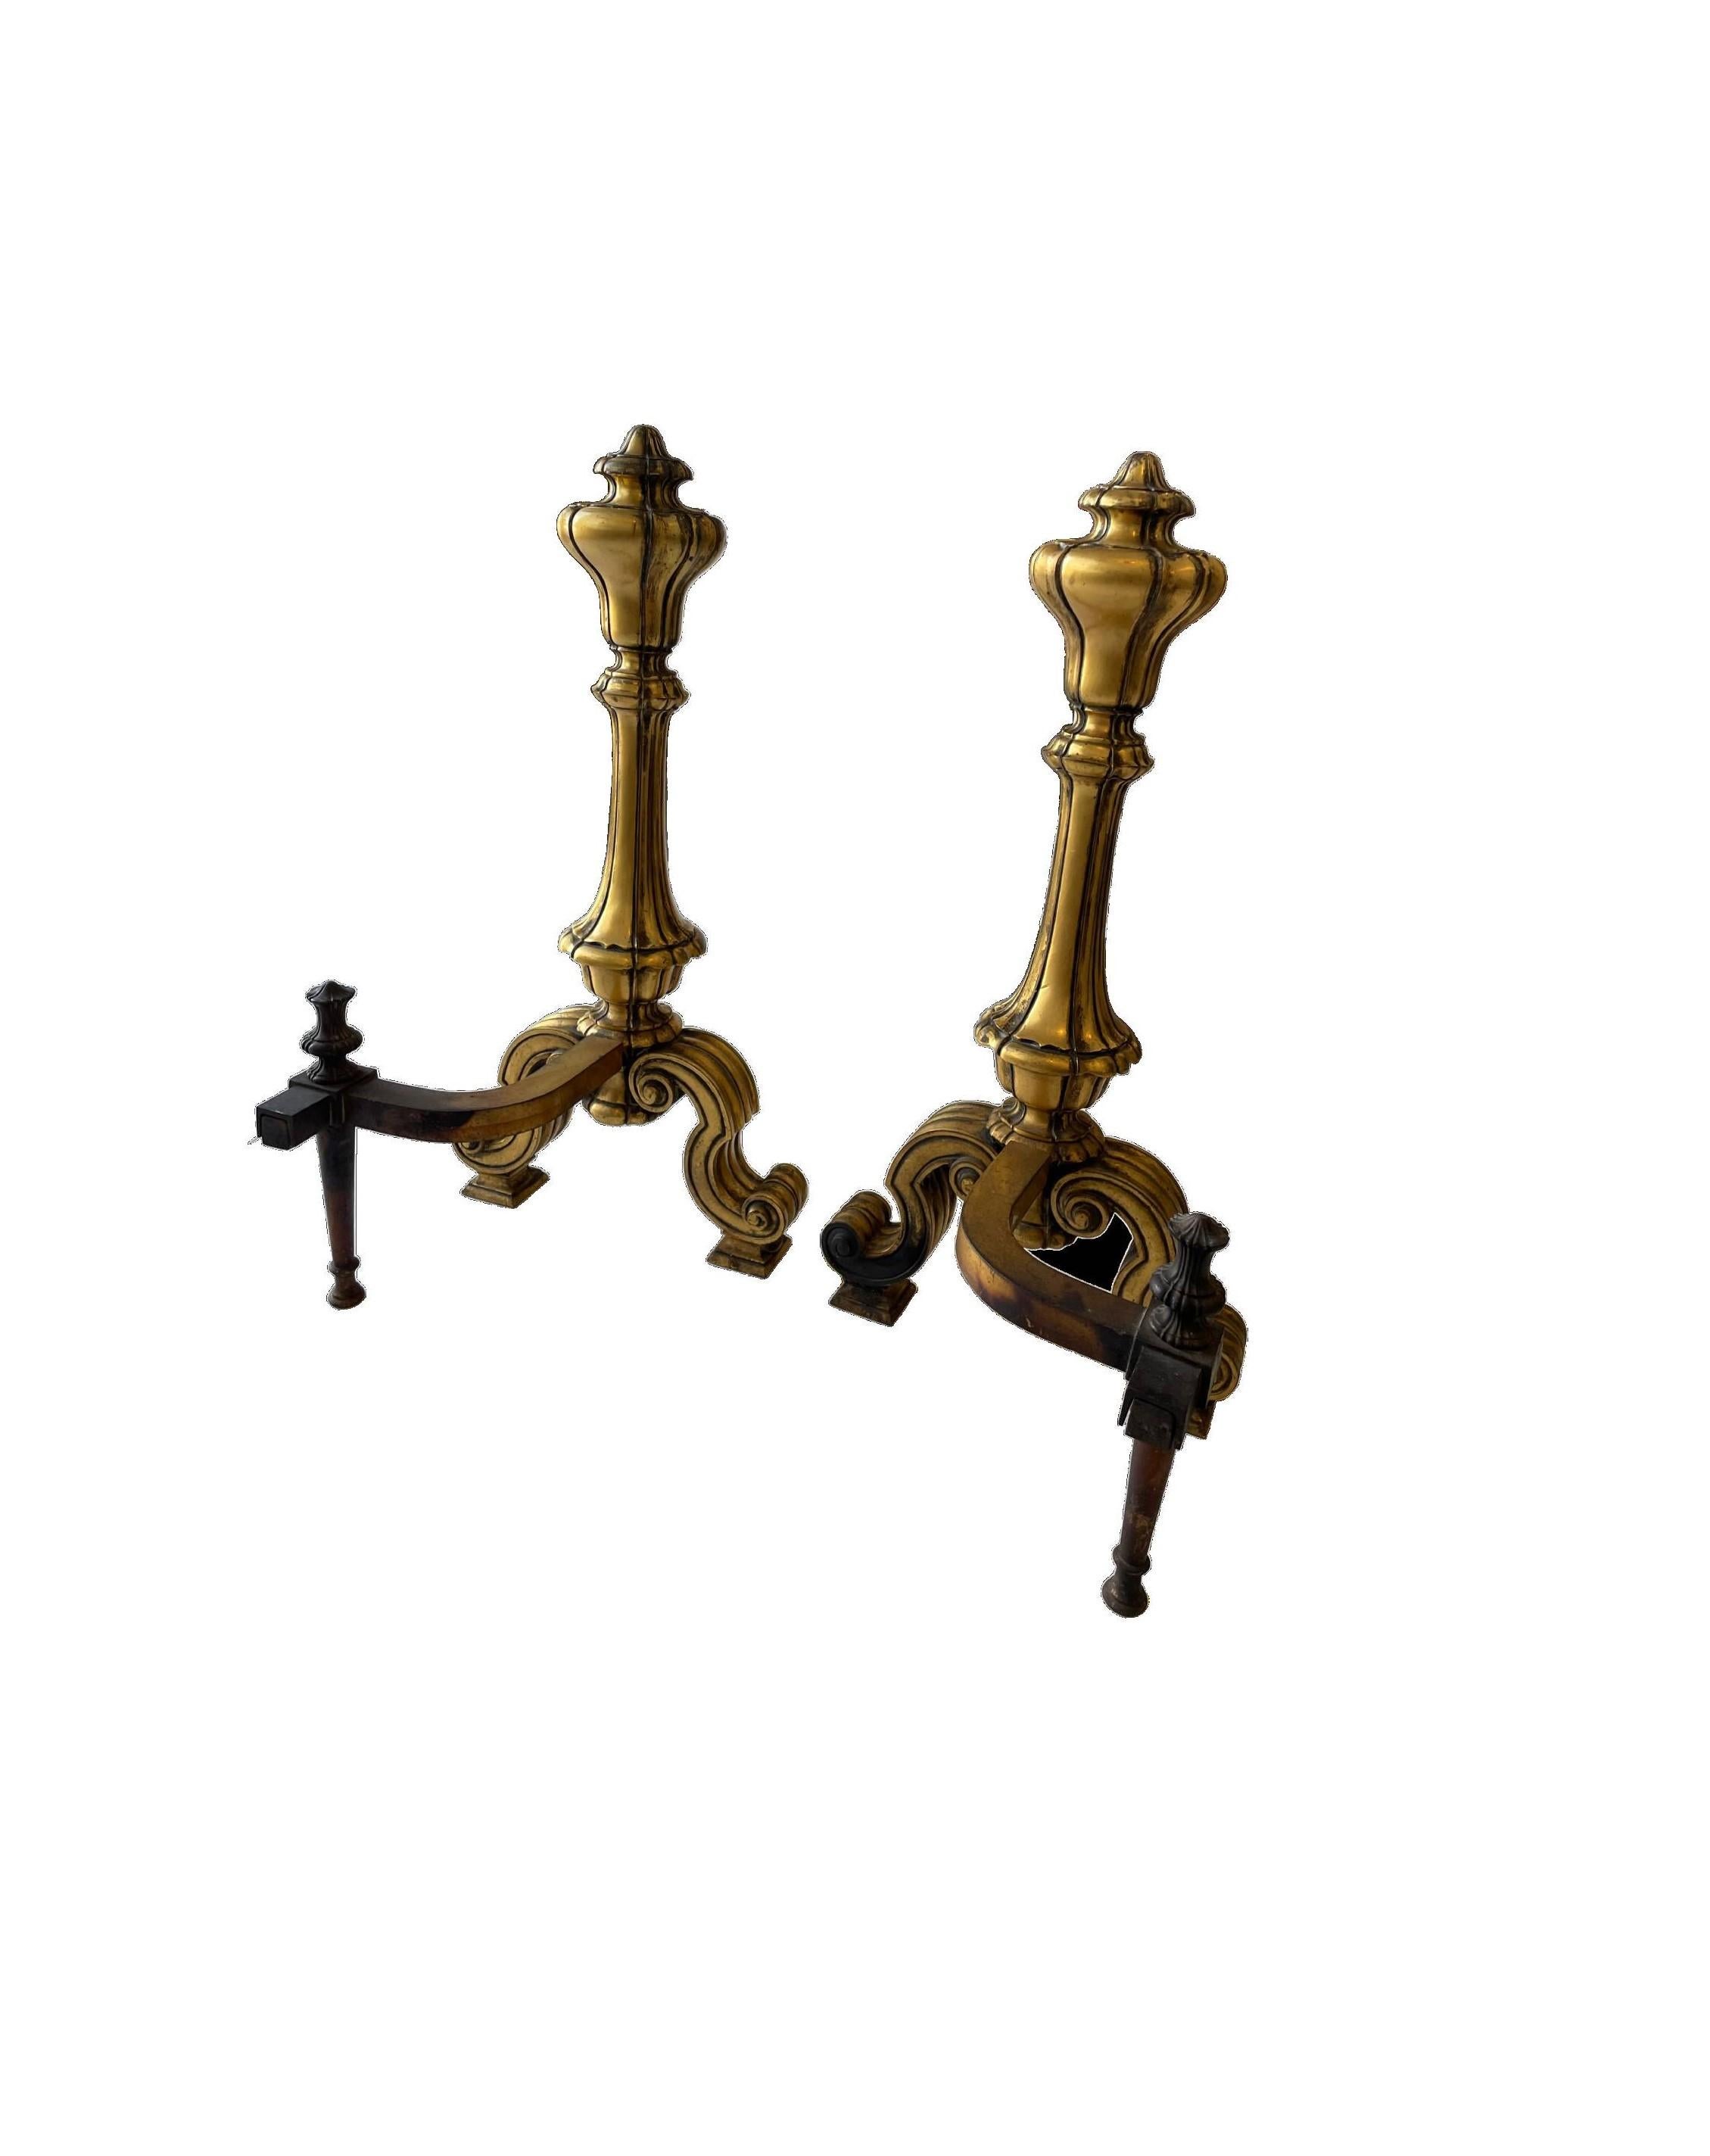 Large-scale ornate set of andirons with beautiful brass detailing and curved scroll feet will stand out in any stately fireplace. Complete with gorgeous gilded brass and pewter set of 4 piece fireplace tools and stand. 